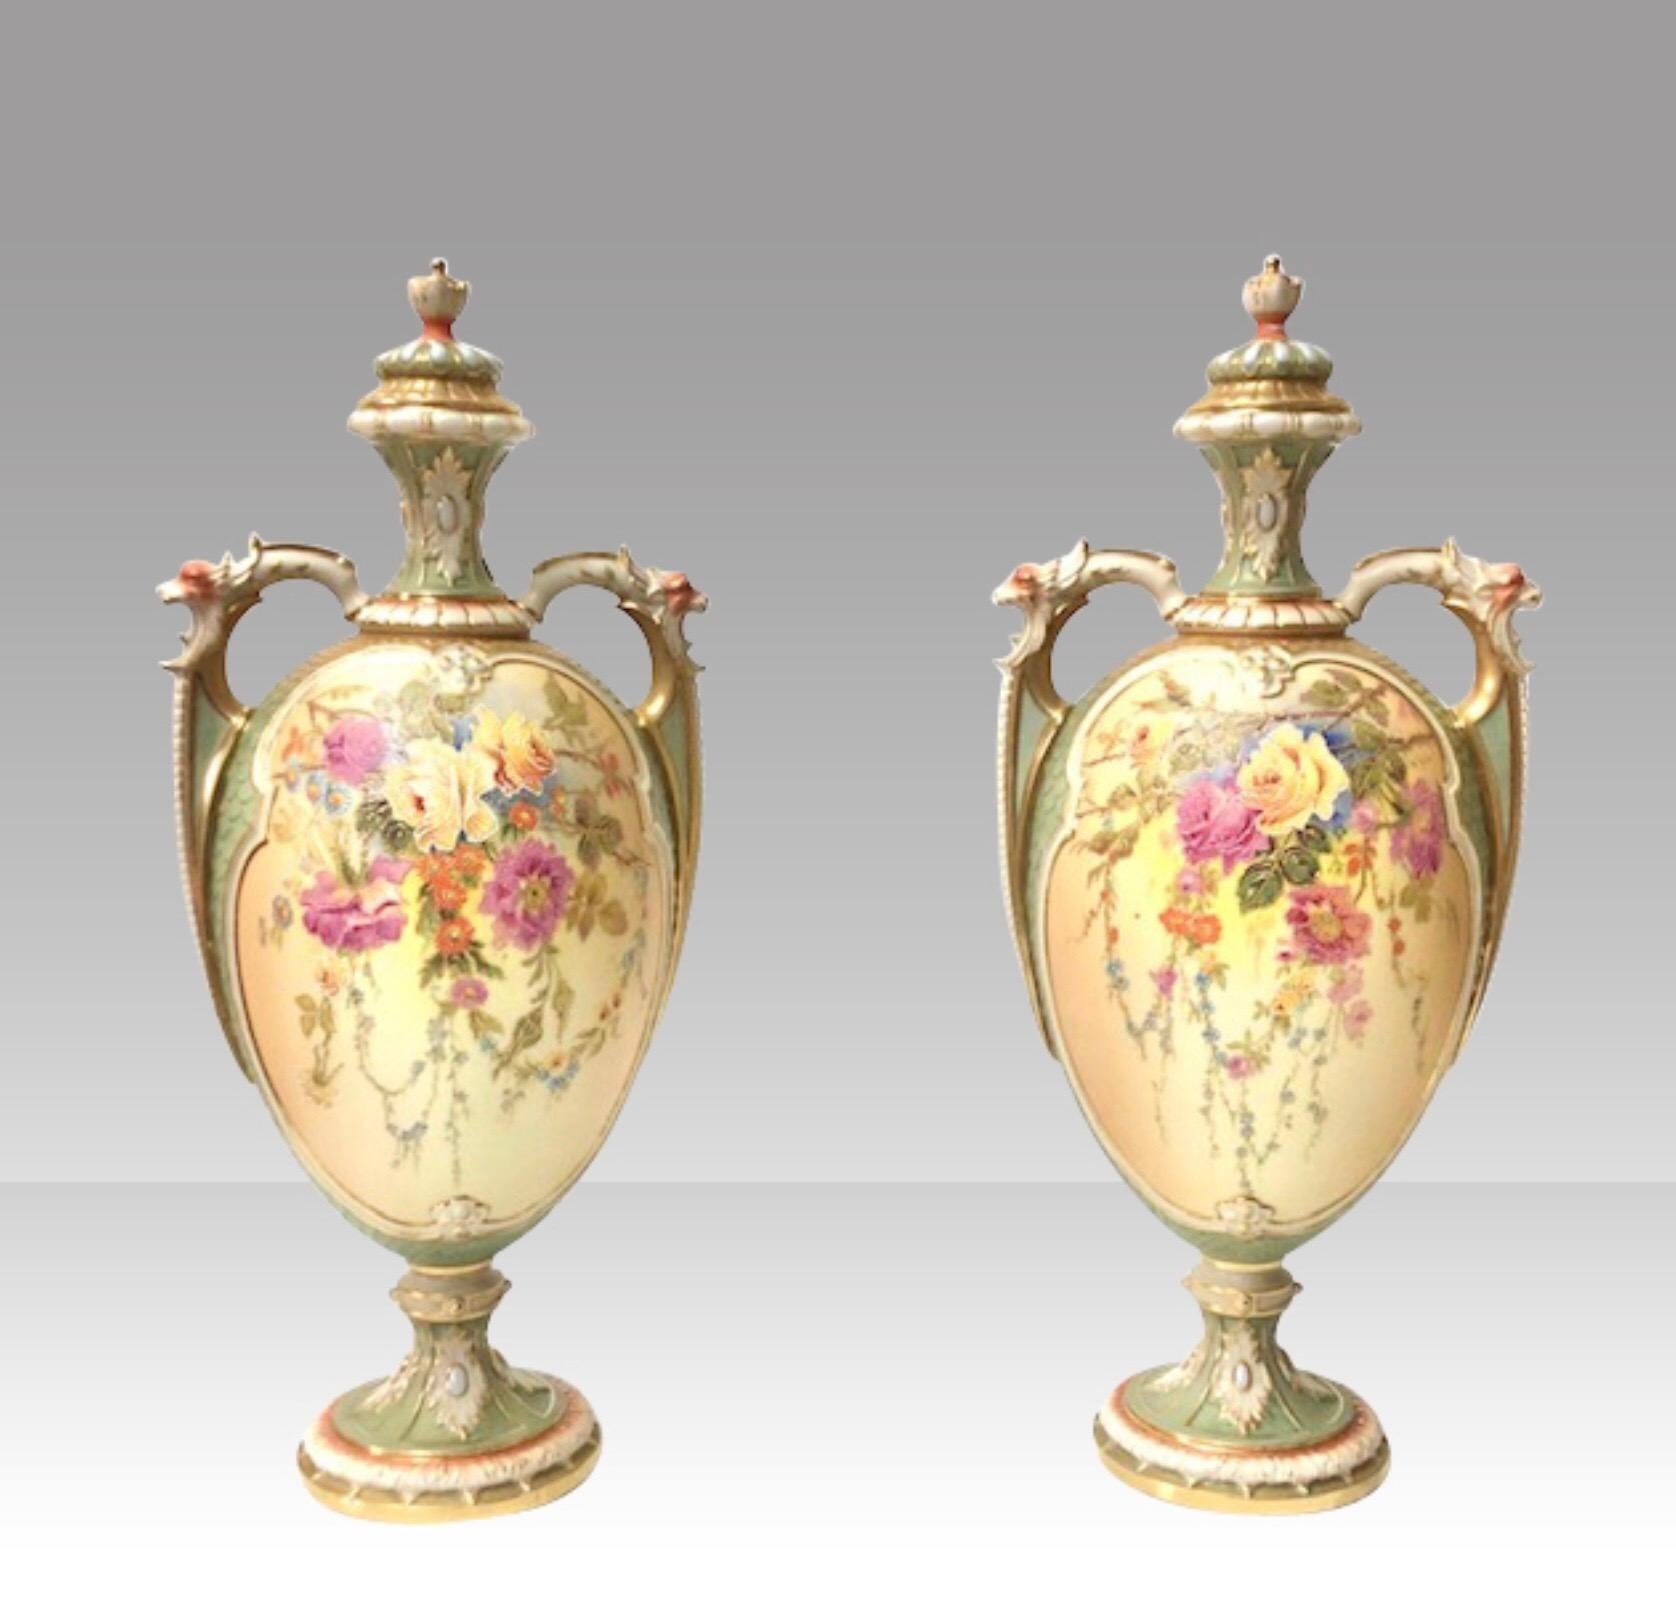 Magnificent pair of large antique hand painted blush ivory and turquoise Royal Worcester vases & covers, exquisitely gilded & decorated with flowers.
Each signed W Hale
Dated 1909
Measures: height 37 cm x 16 cm x 13 cm deep.
 